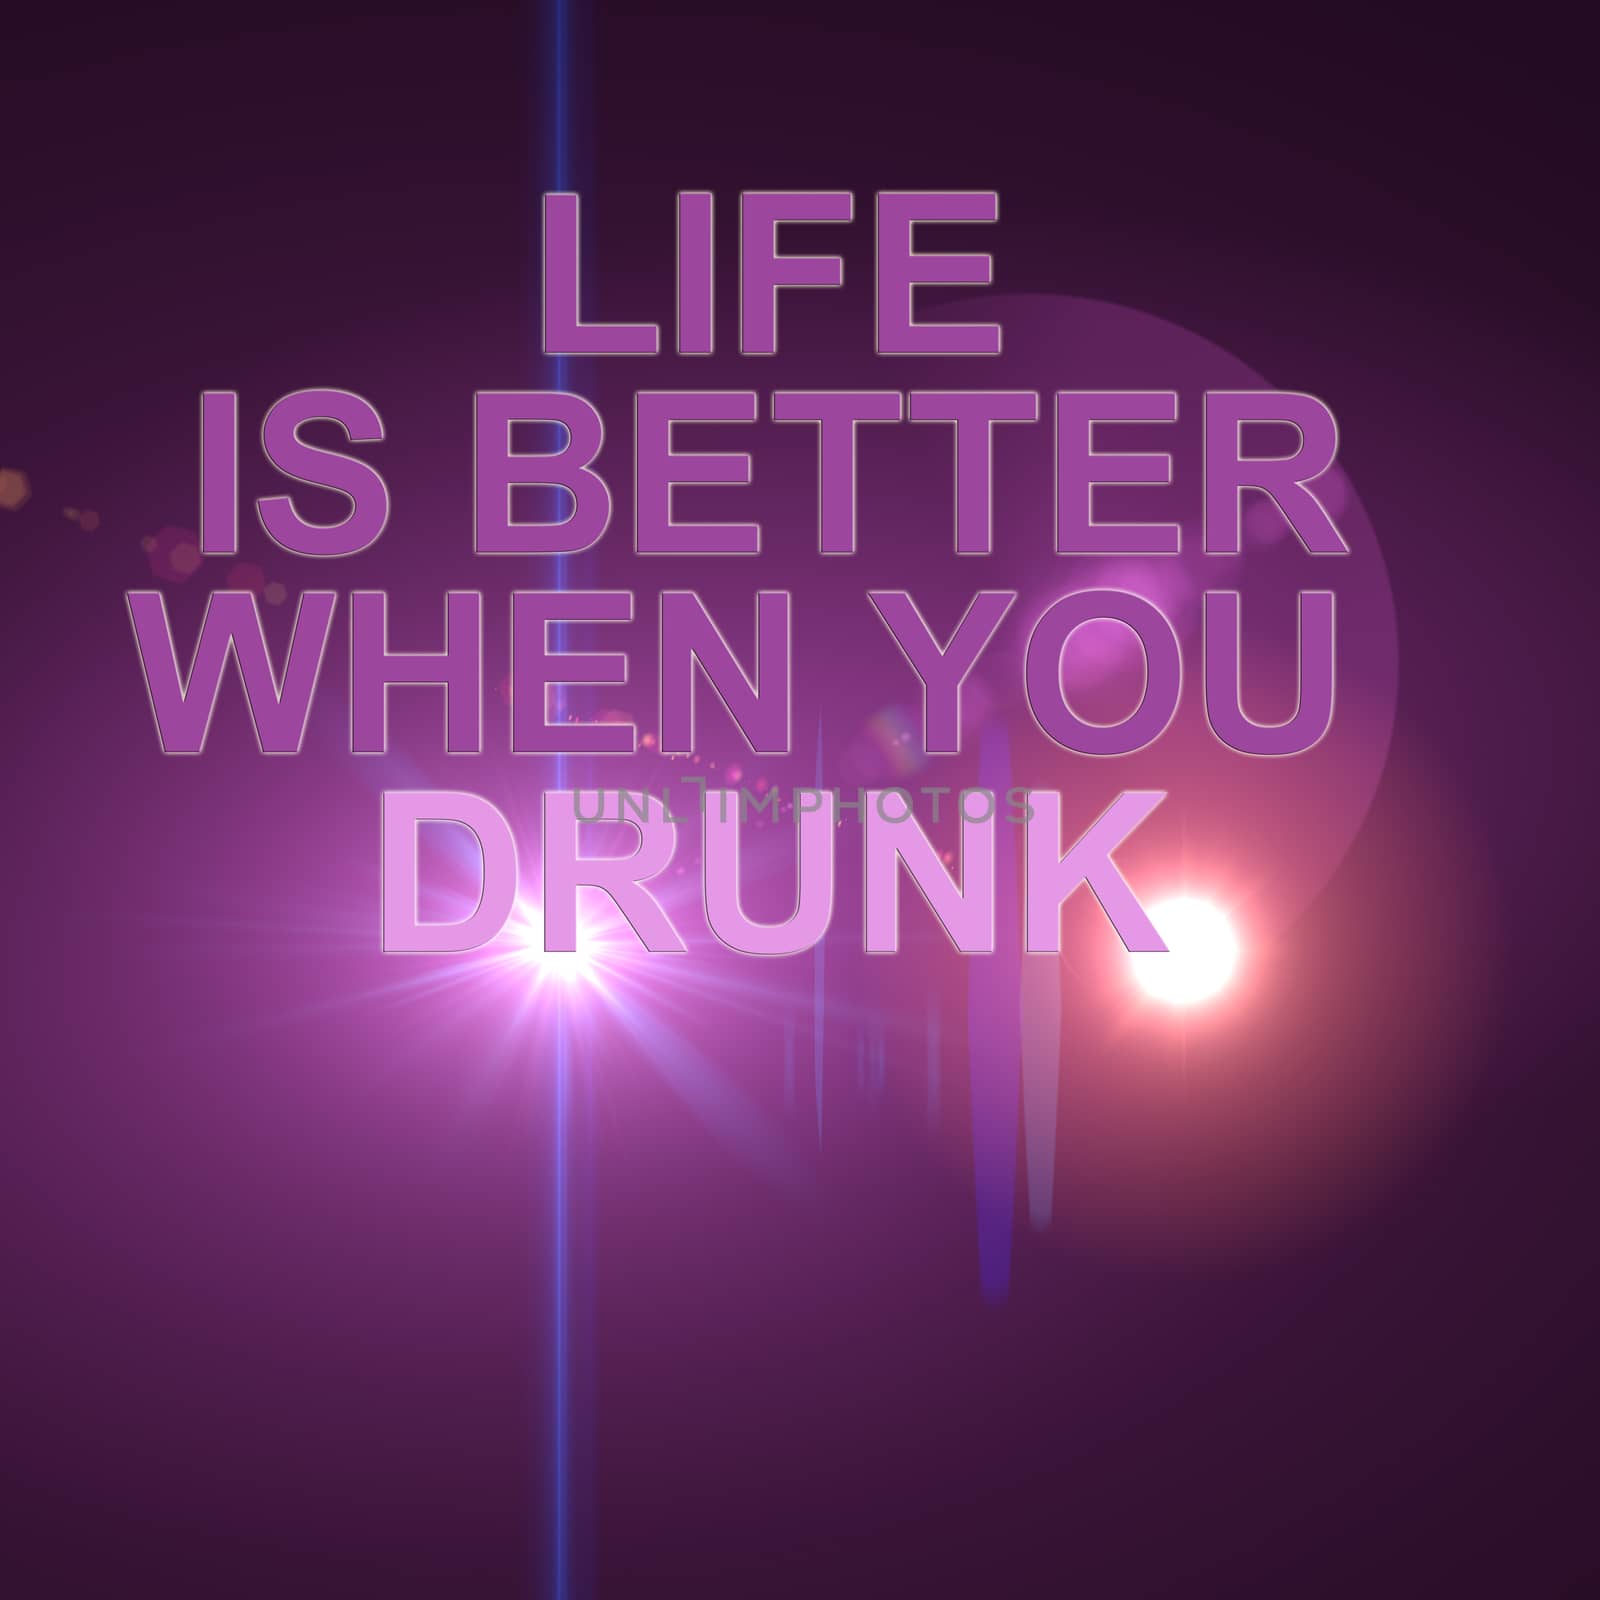 LIFE IS BETER WHEN YOU DRUNK by vitanovski